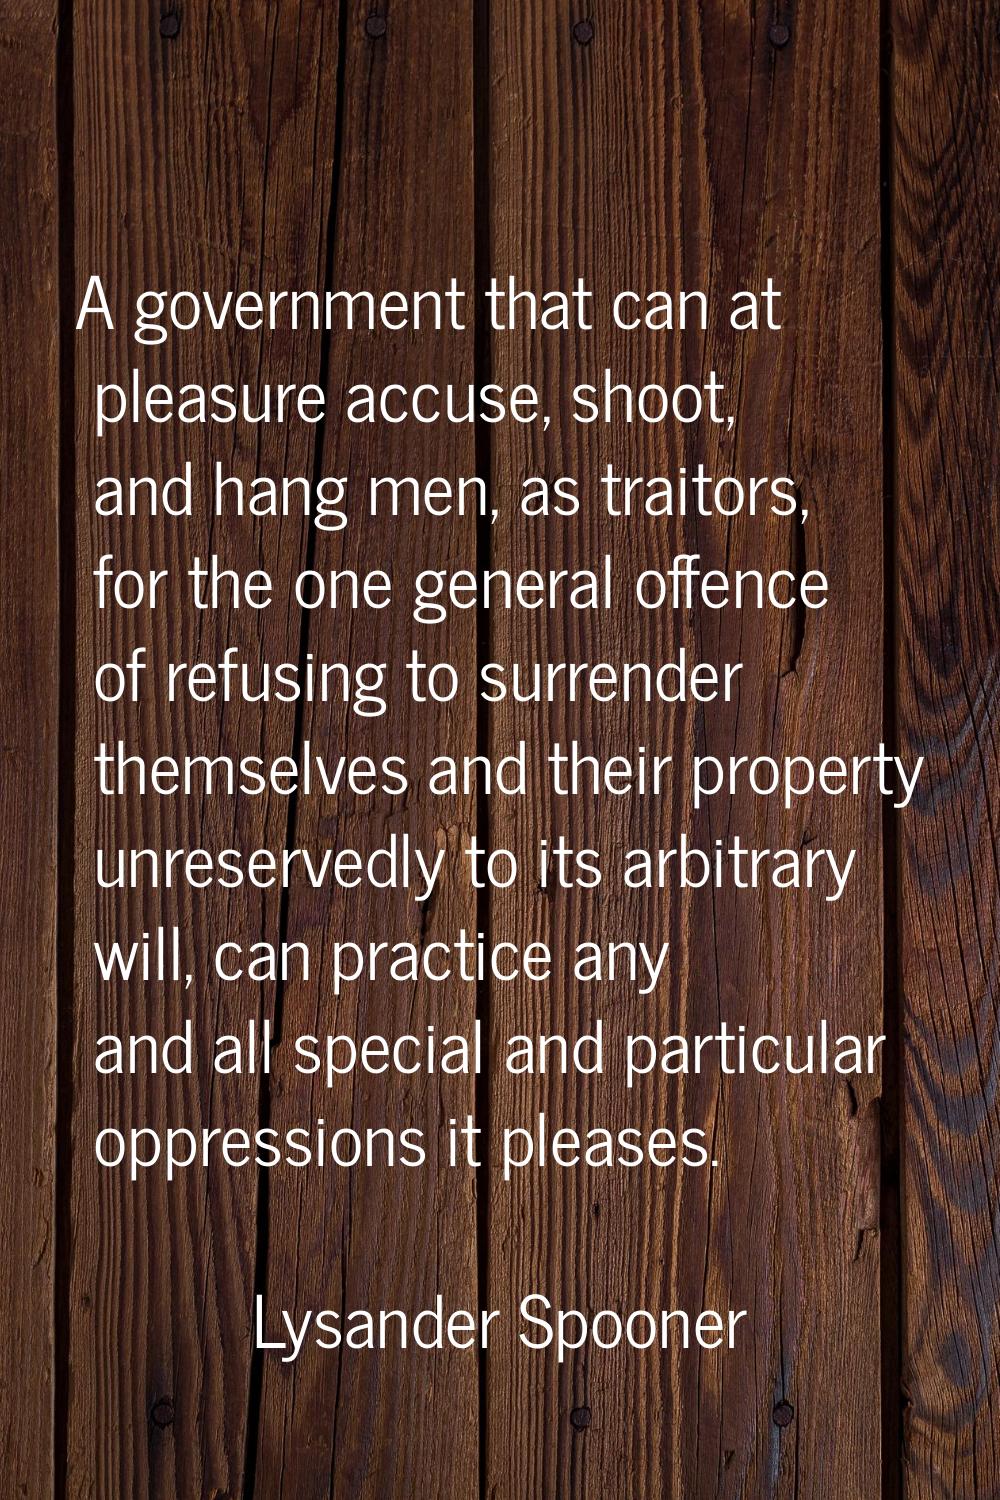 A government that can at pleasure accuse, shoot, and hang men, as traitors, for the one general off